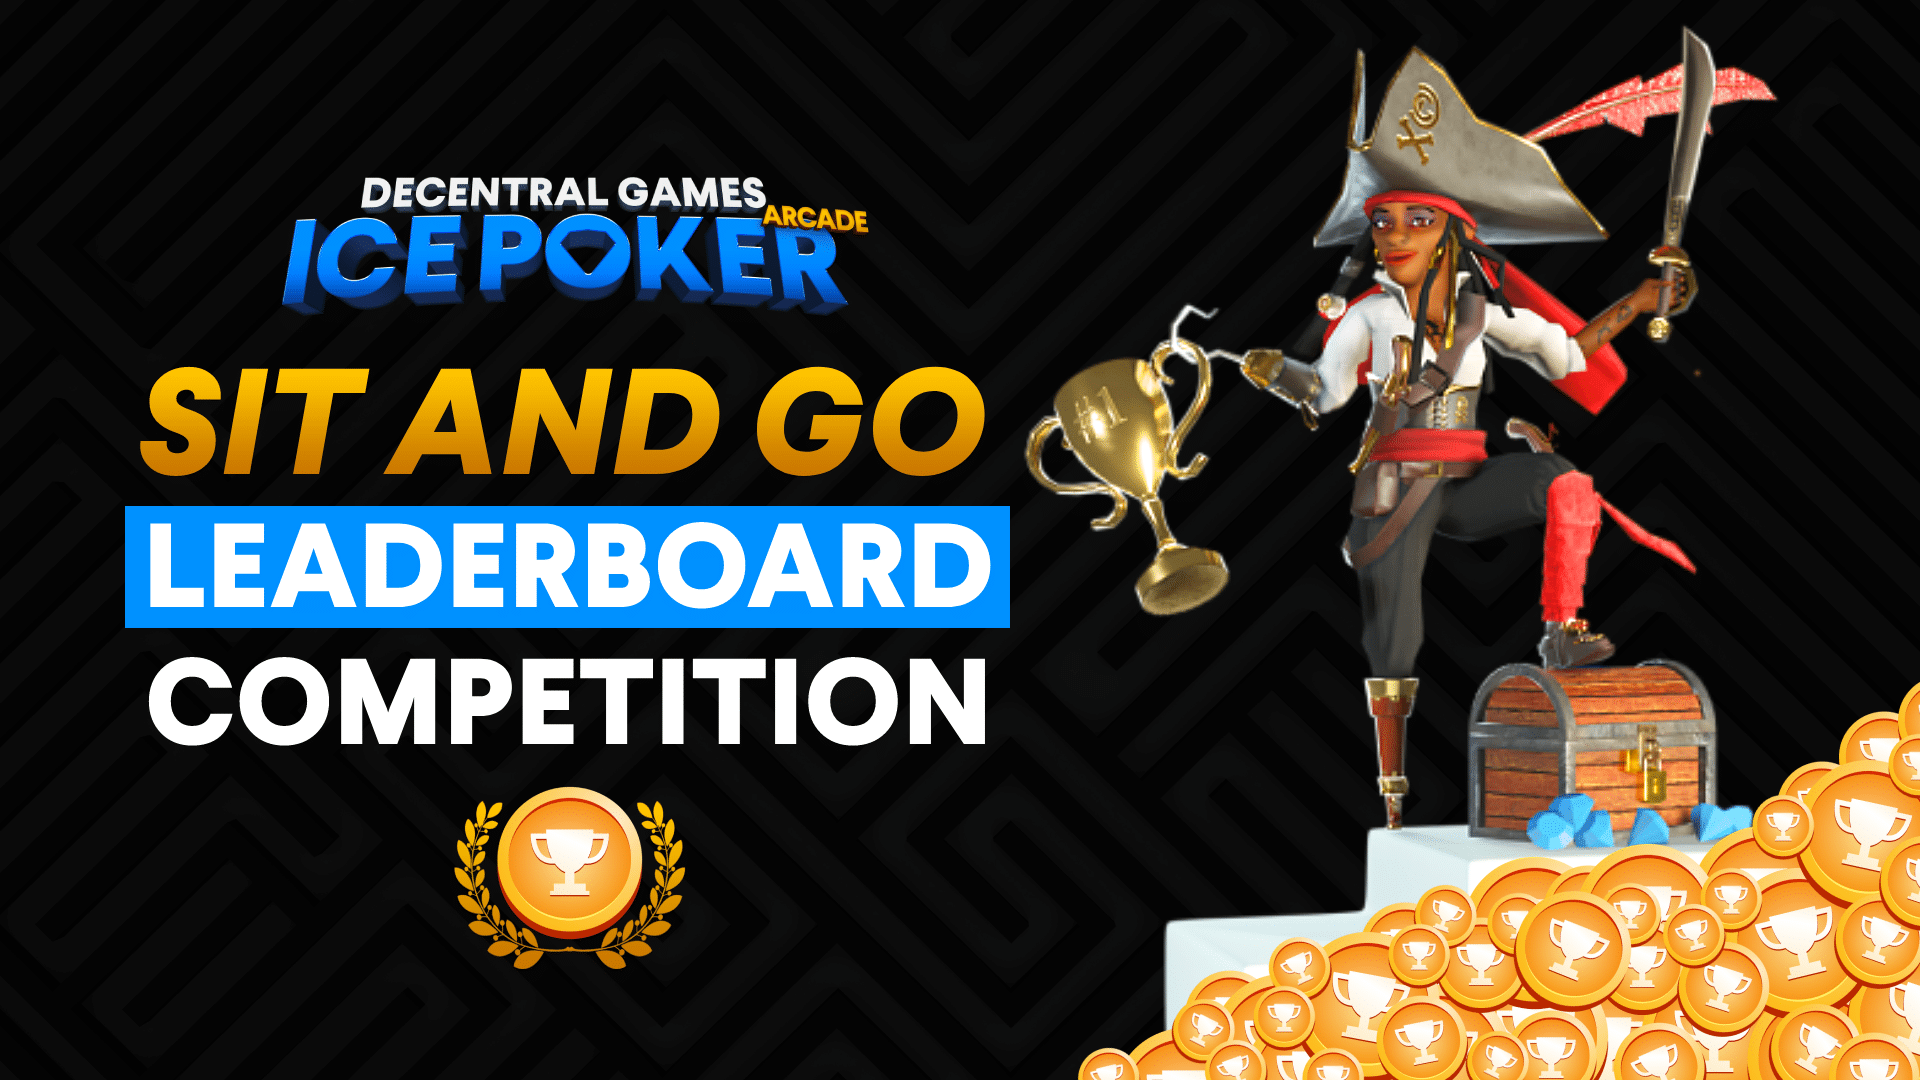 ICE Poker SNG leaderboard competition with ICE Pirate standing on a podium